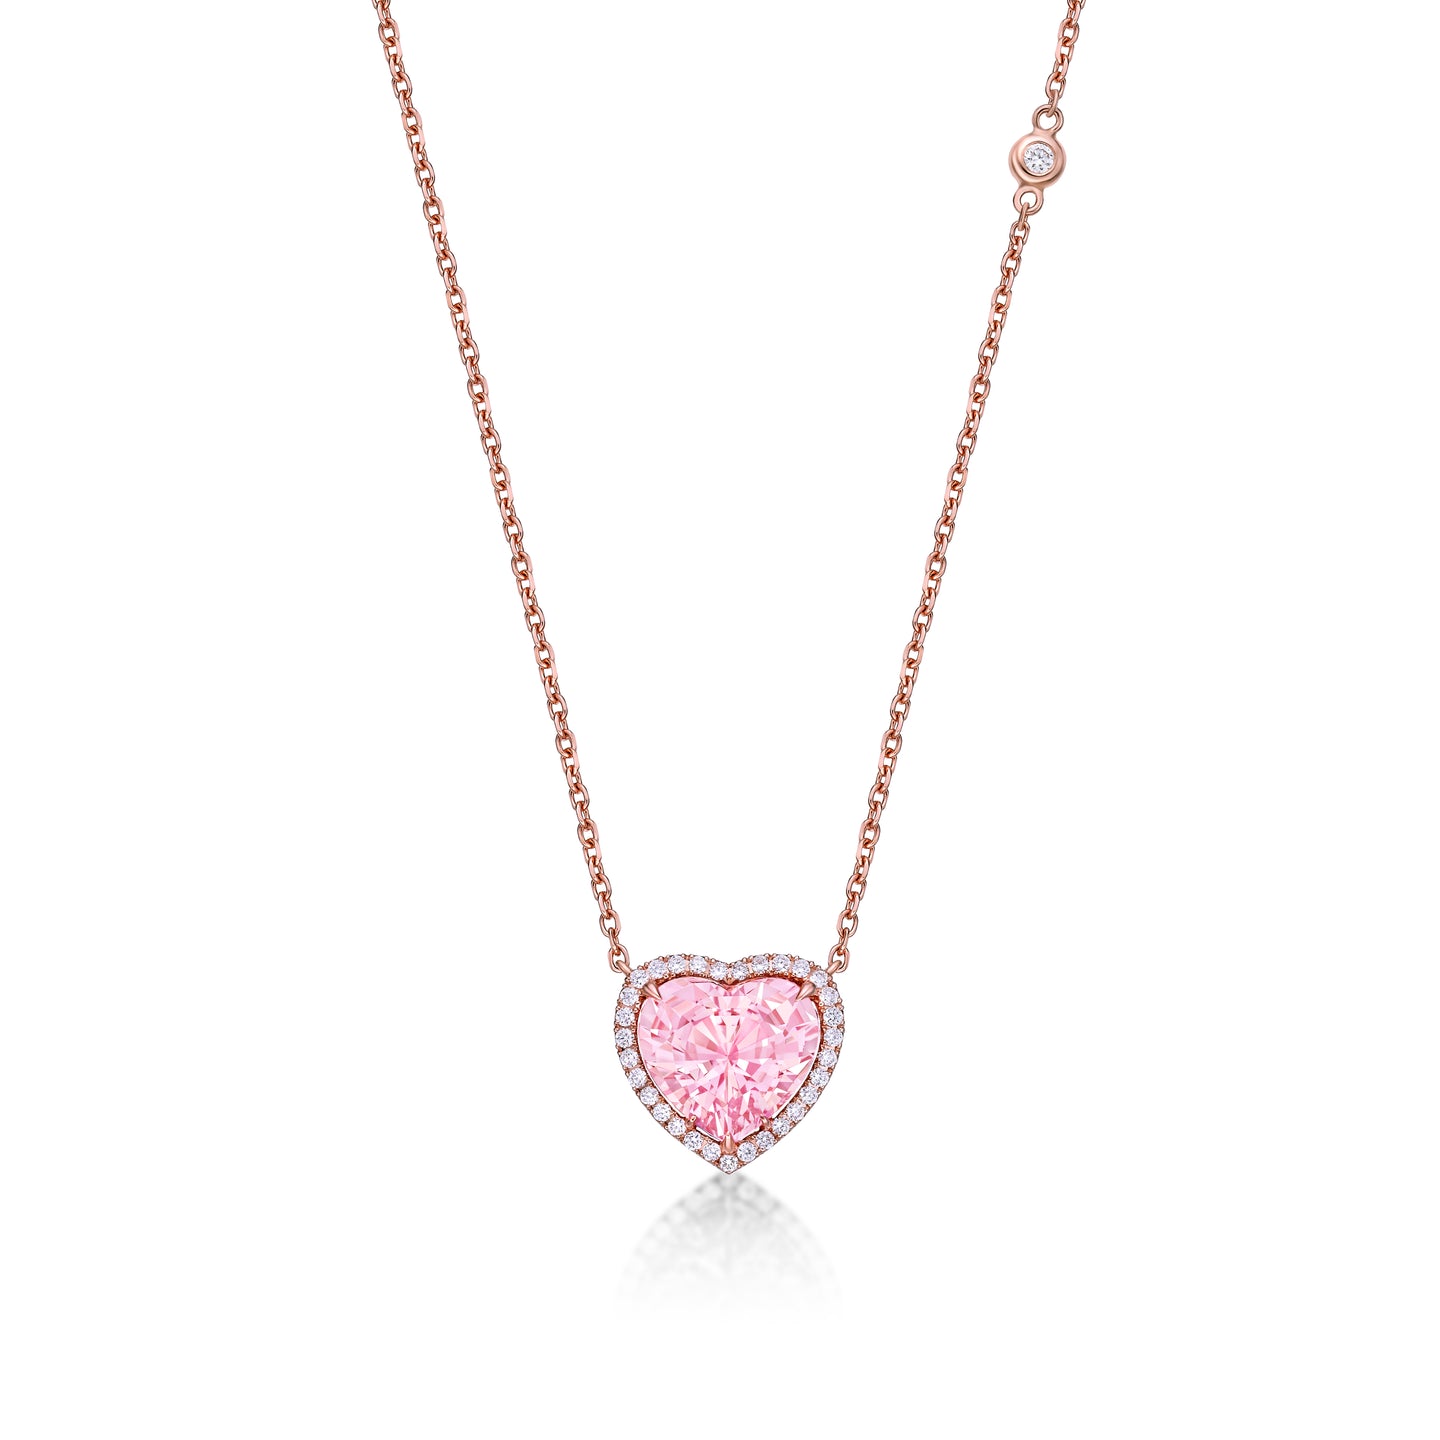 Heart Shape Necklace For Too Faced